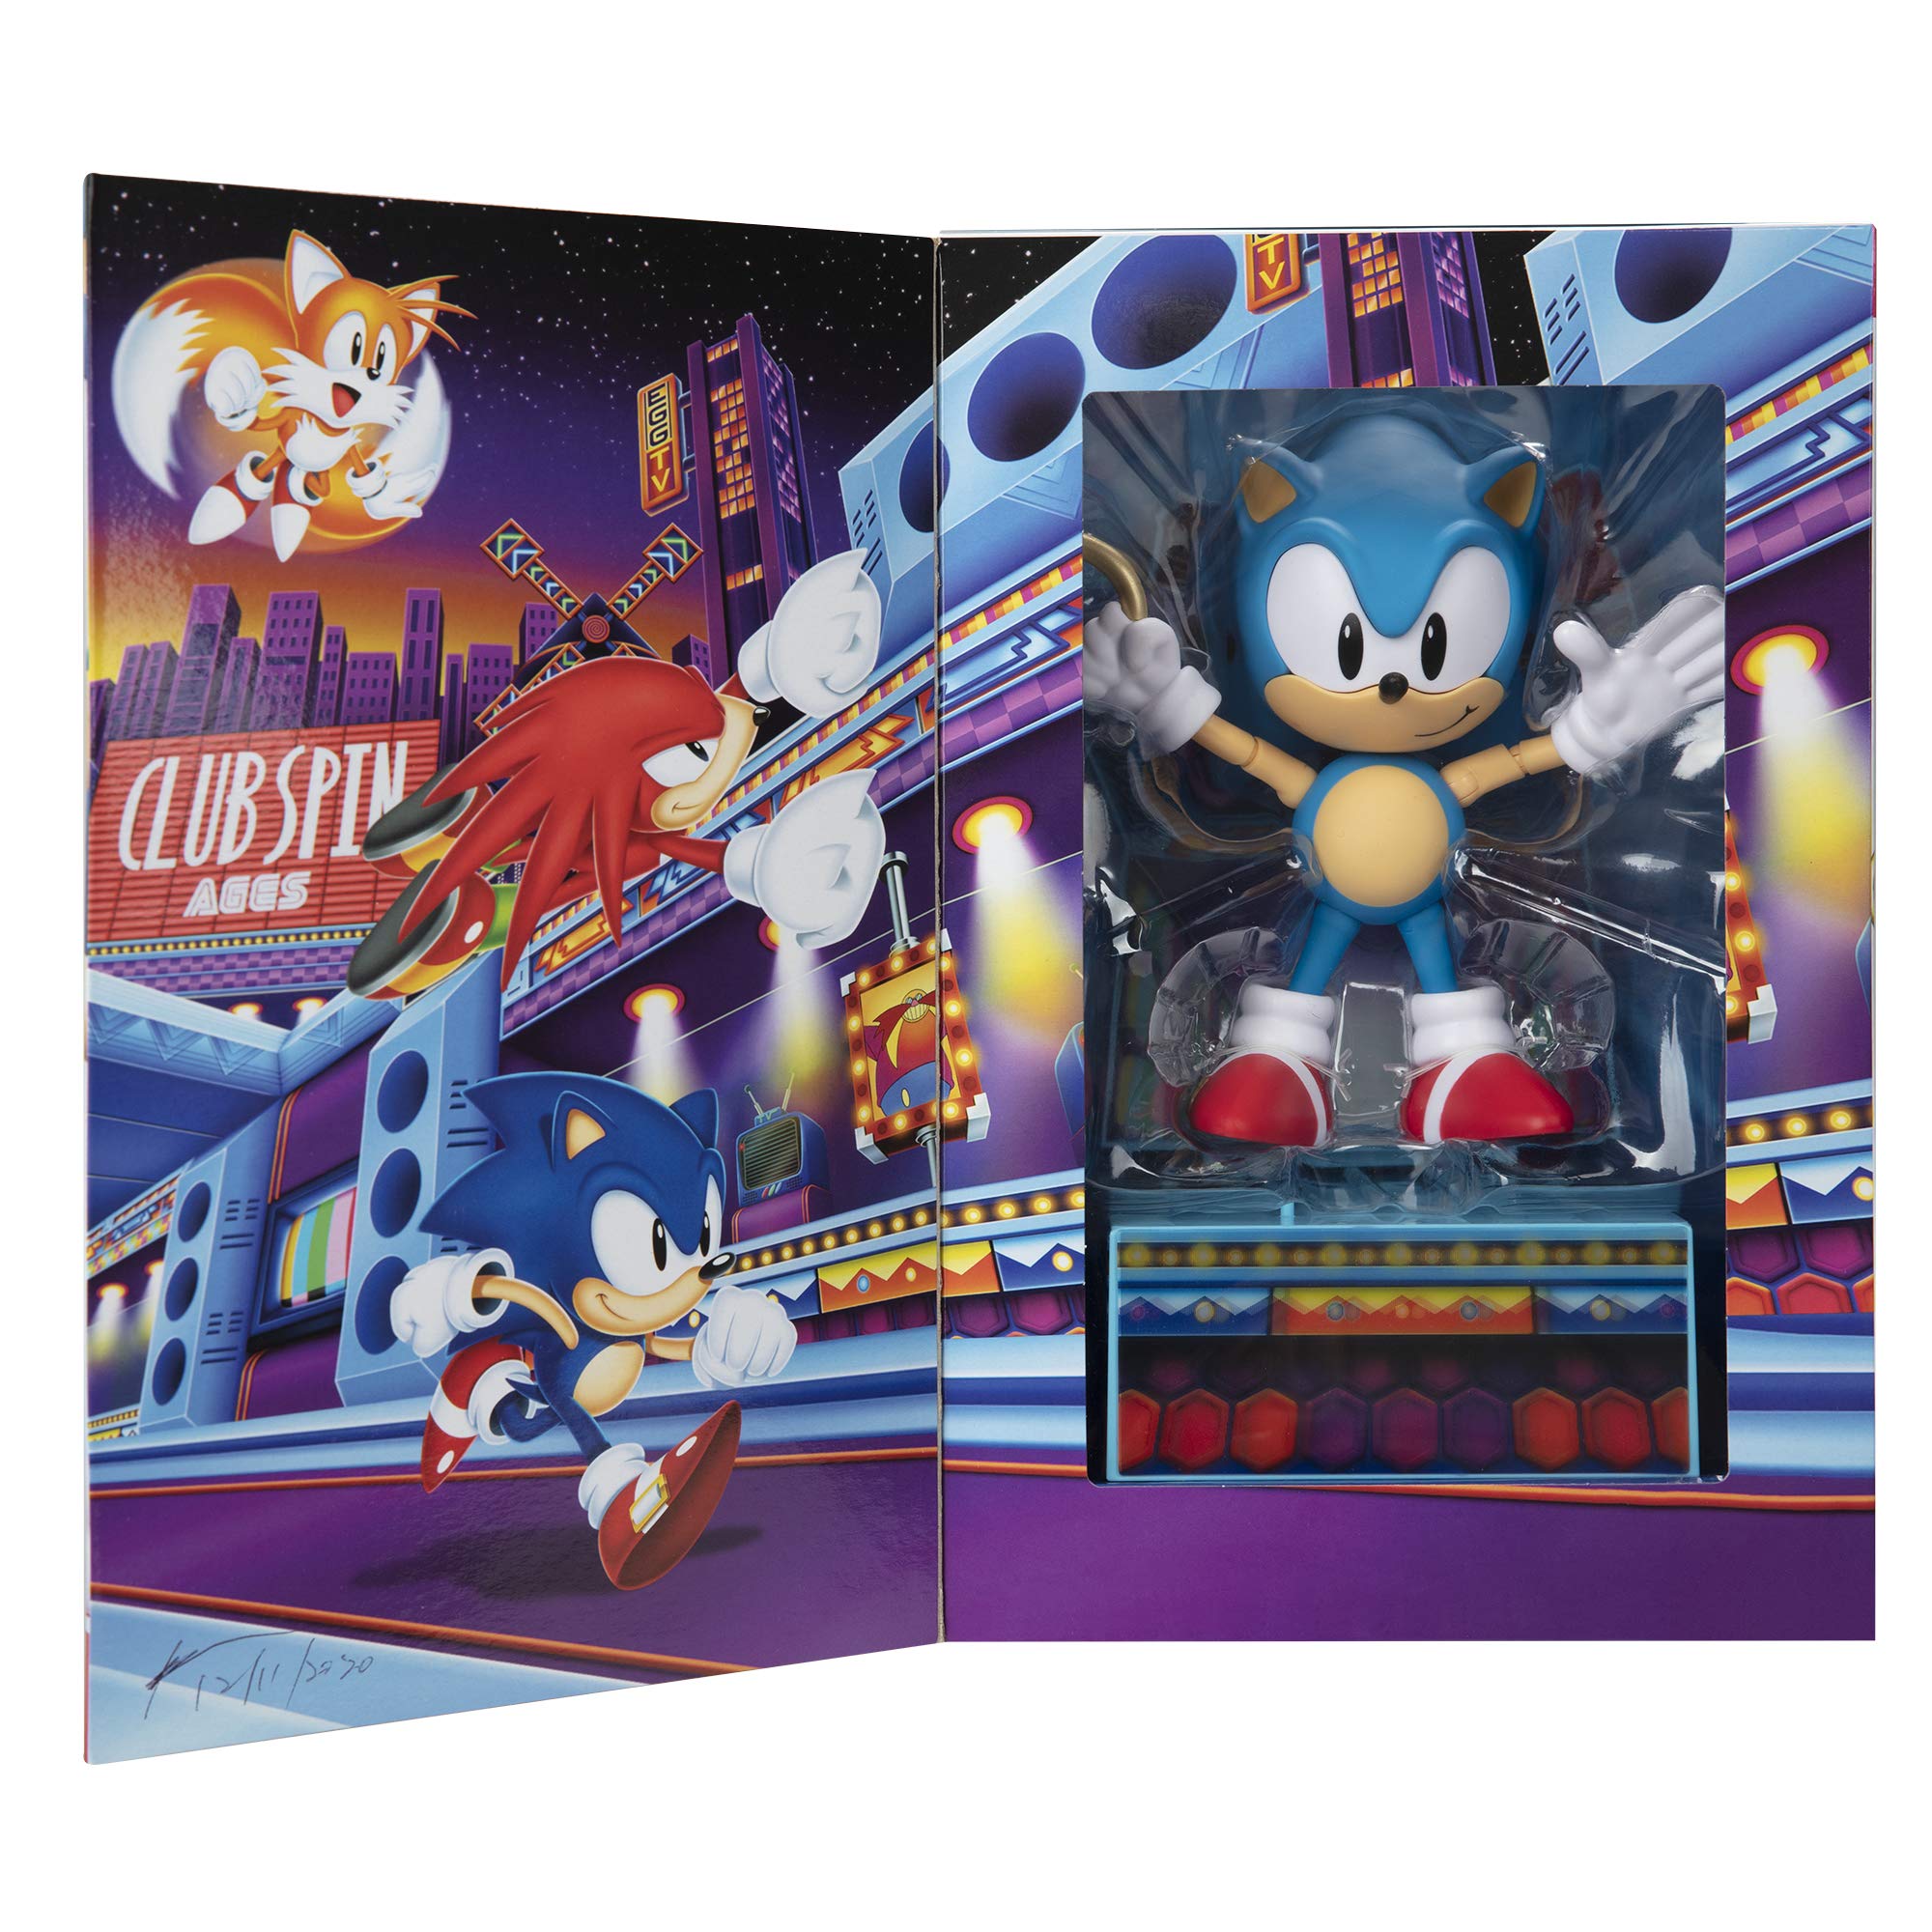 6" Sonic The Hedgehog Ultimate Sonic Collectible Action Figure w/ 12 Swappable Parts $26.19 + Free Shipping w/ Prime or on $35+